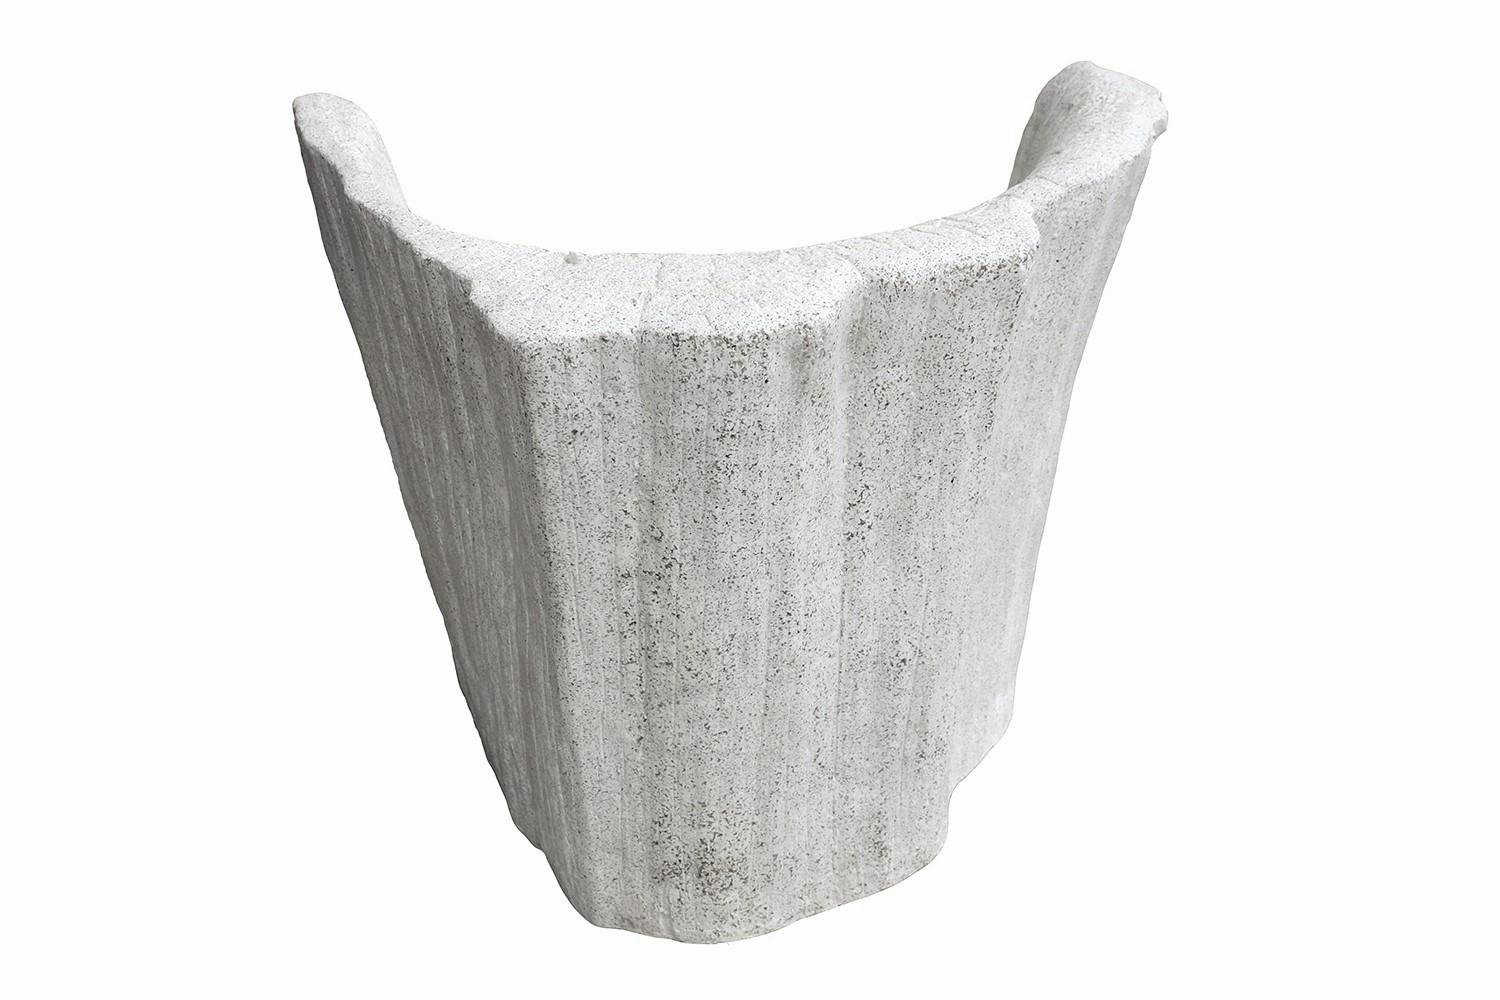 Minimalist Cast Resin 'Acacia' Chair, Natural Stone Finish by Zachary A. Design For Sale